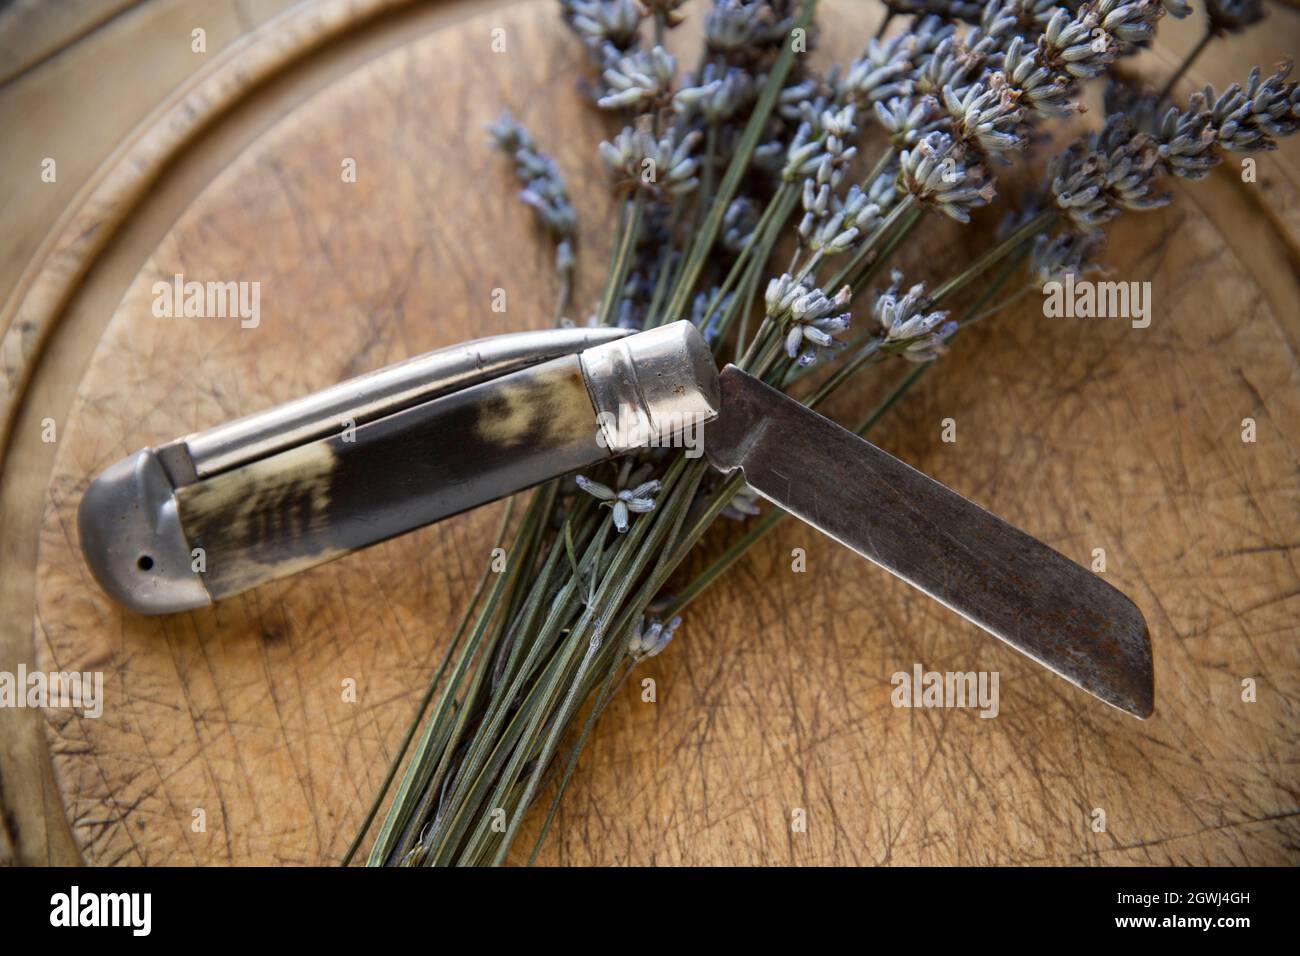 A bunch of lavender, cut from a plant growing in a garden, displayed next to an old penknife. Lancashire England UK GB Stock Photo